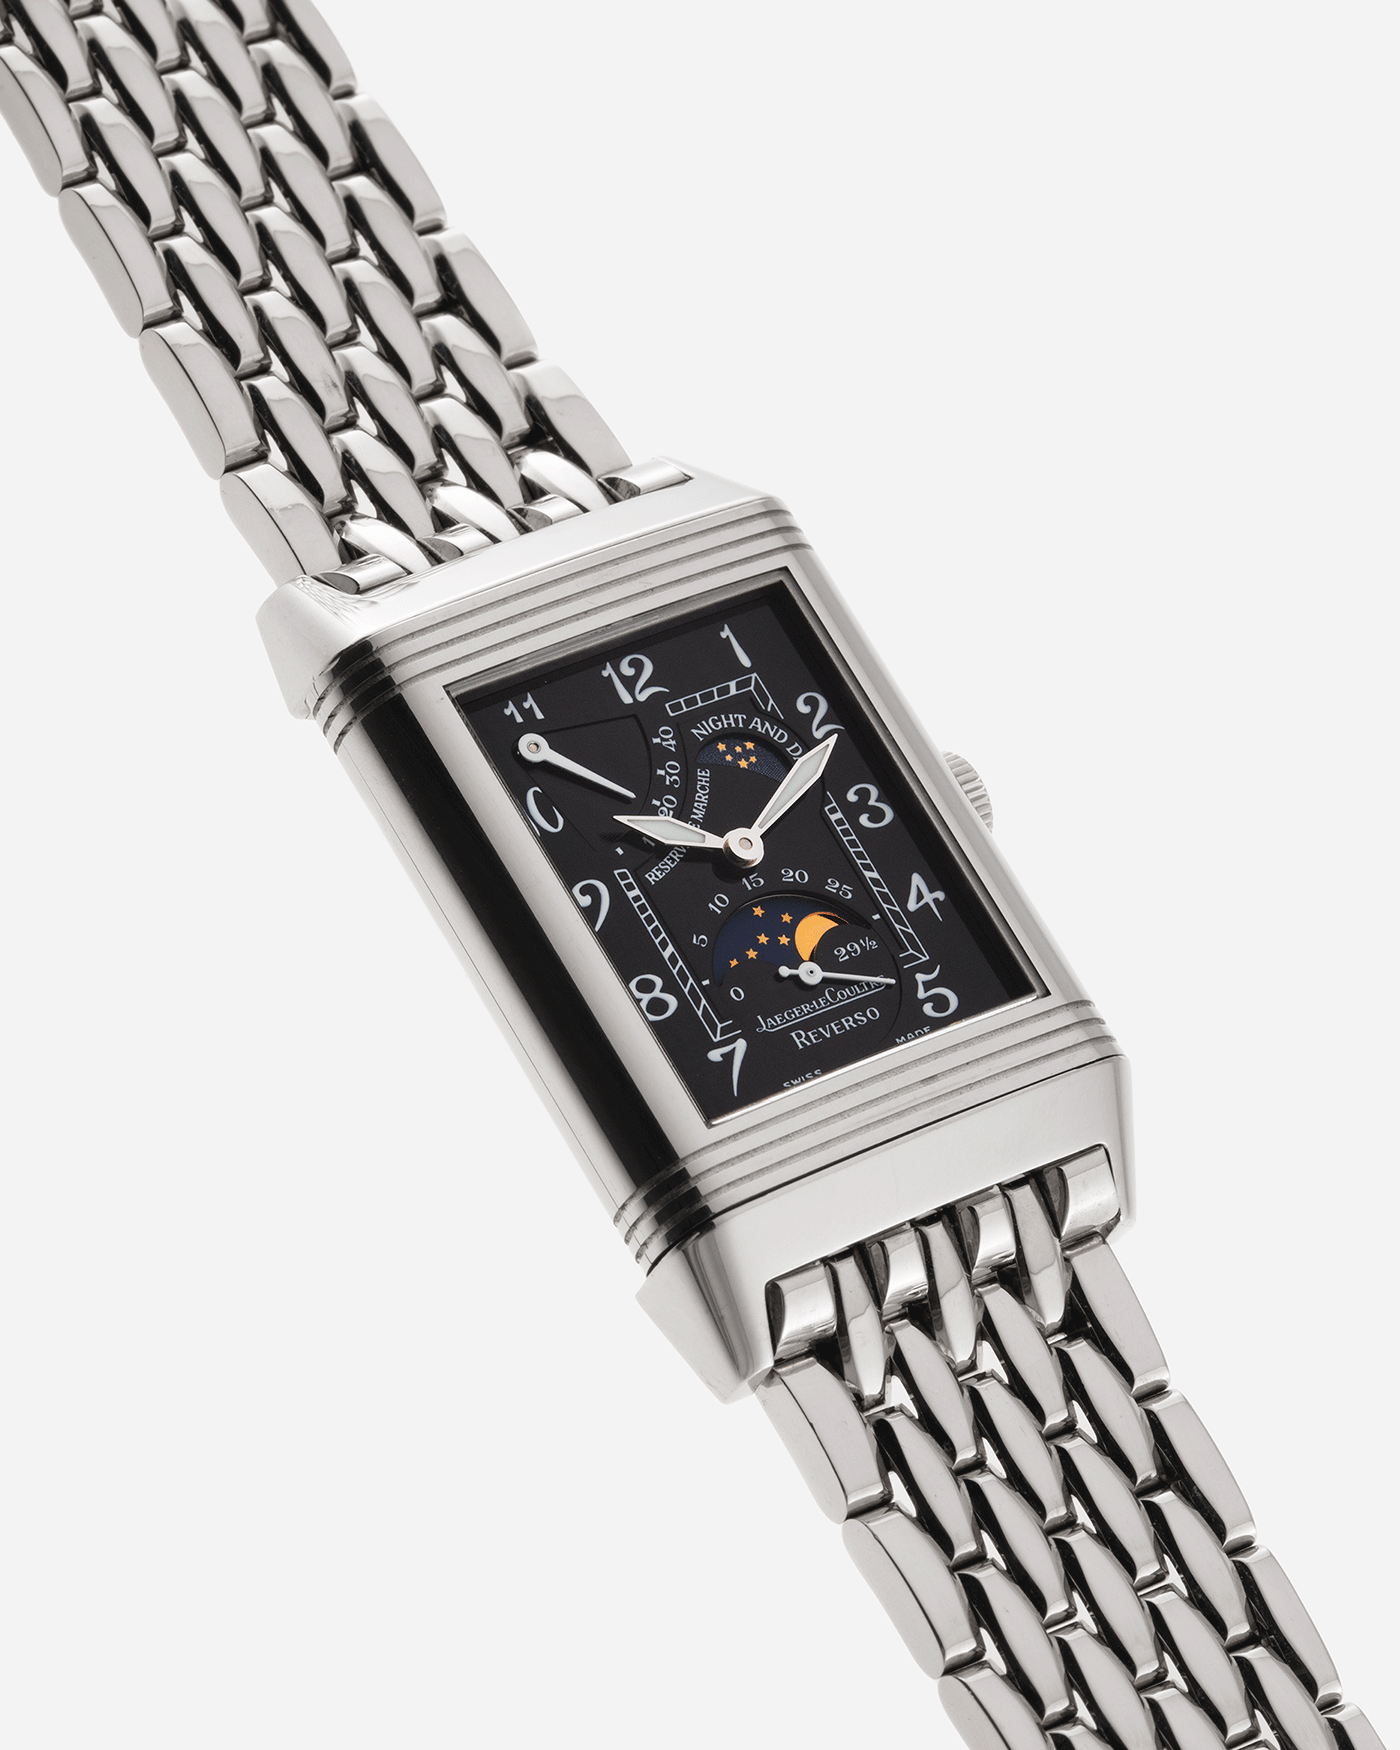 Brand: Jaeger-LeCoultre Year: 2000’s Model: Reverso Night And Day Reference Number: 270.3.63 Material: 18k White Gold Movement: Manually-Wound JLC cal. 823 Case Diameter: 26mm X 36.6mm Bracelet/Strap: 18k White Gold Jaeger LeCoultre Bracelet